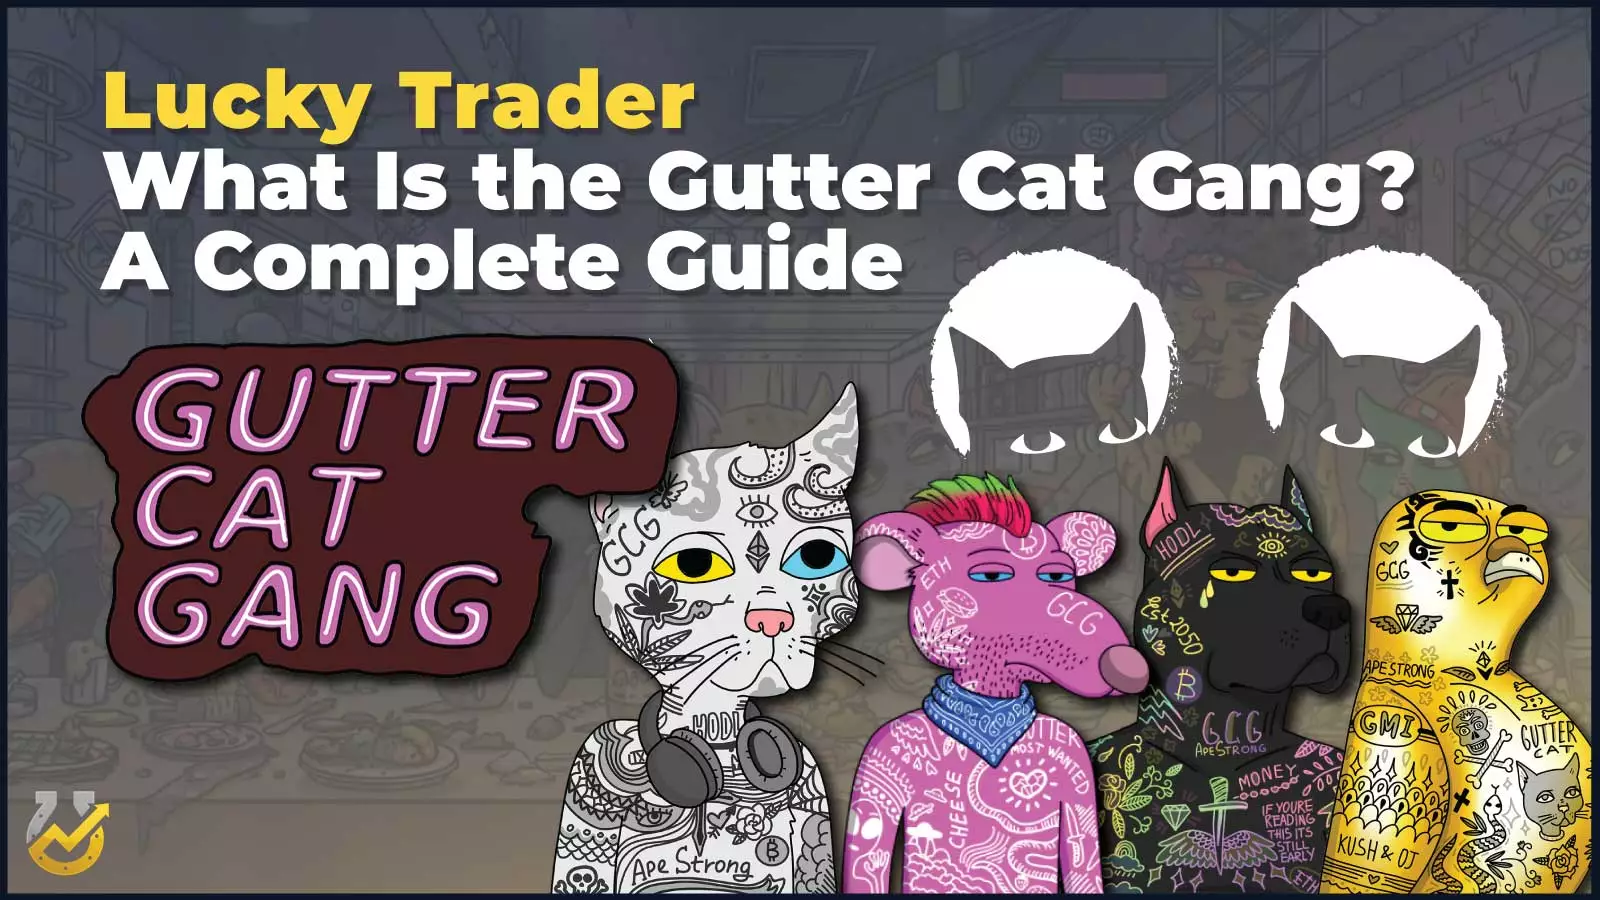 What Is the Gutter Cat Gang? A Complete Guide